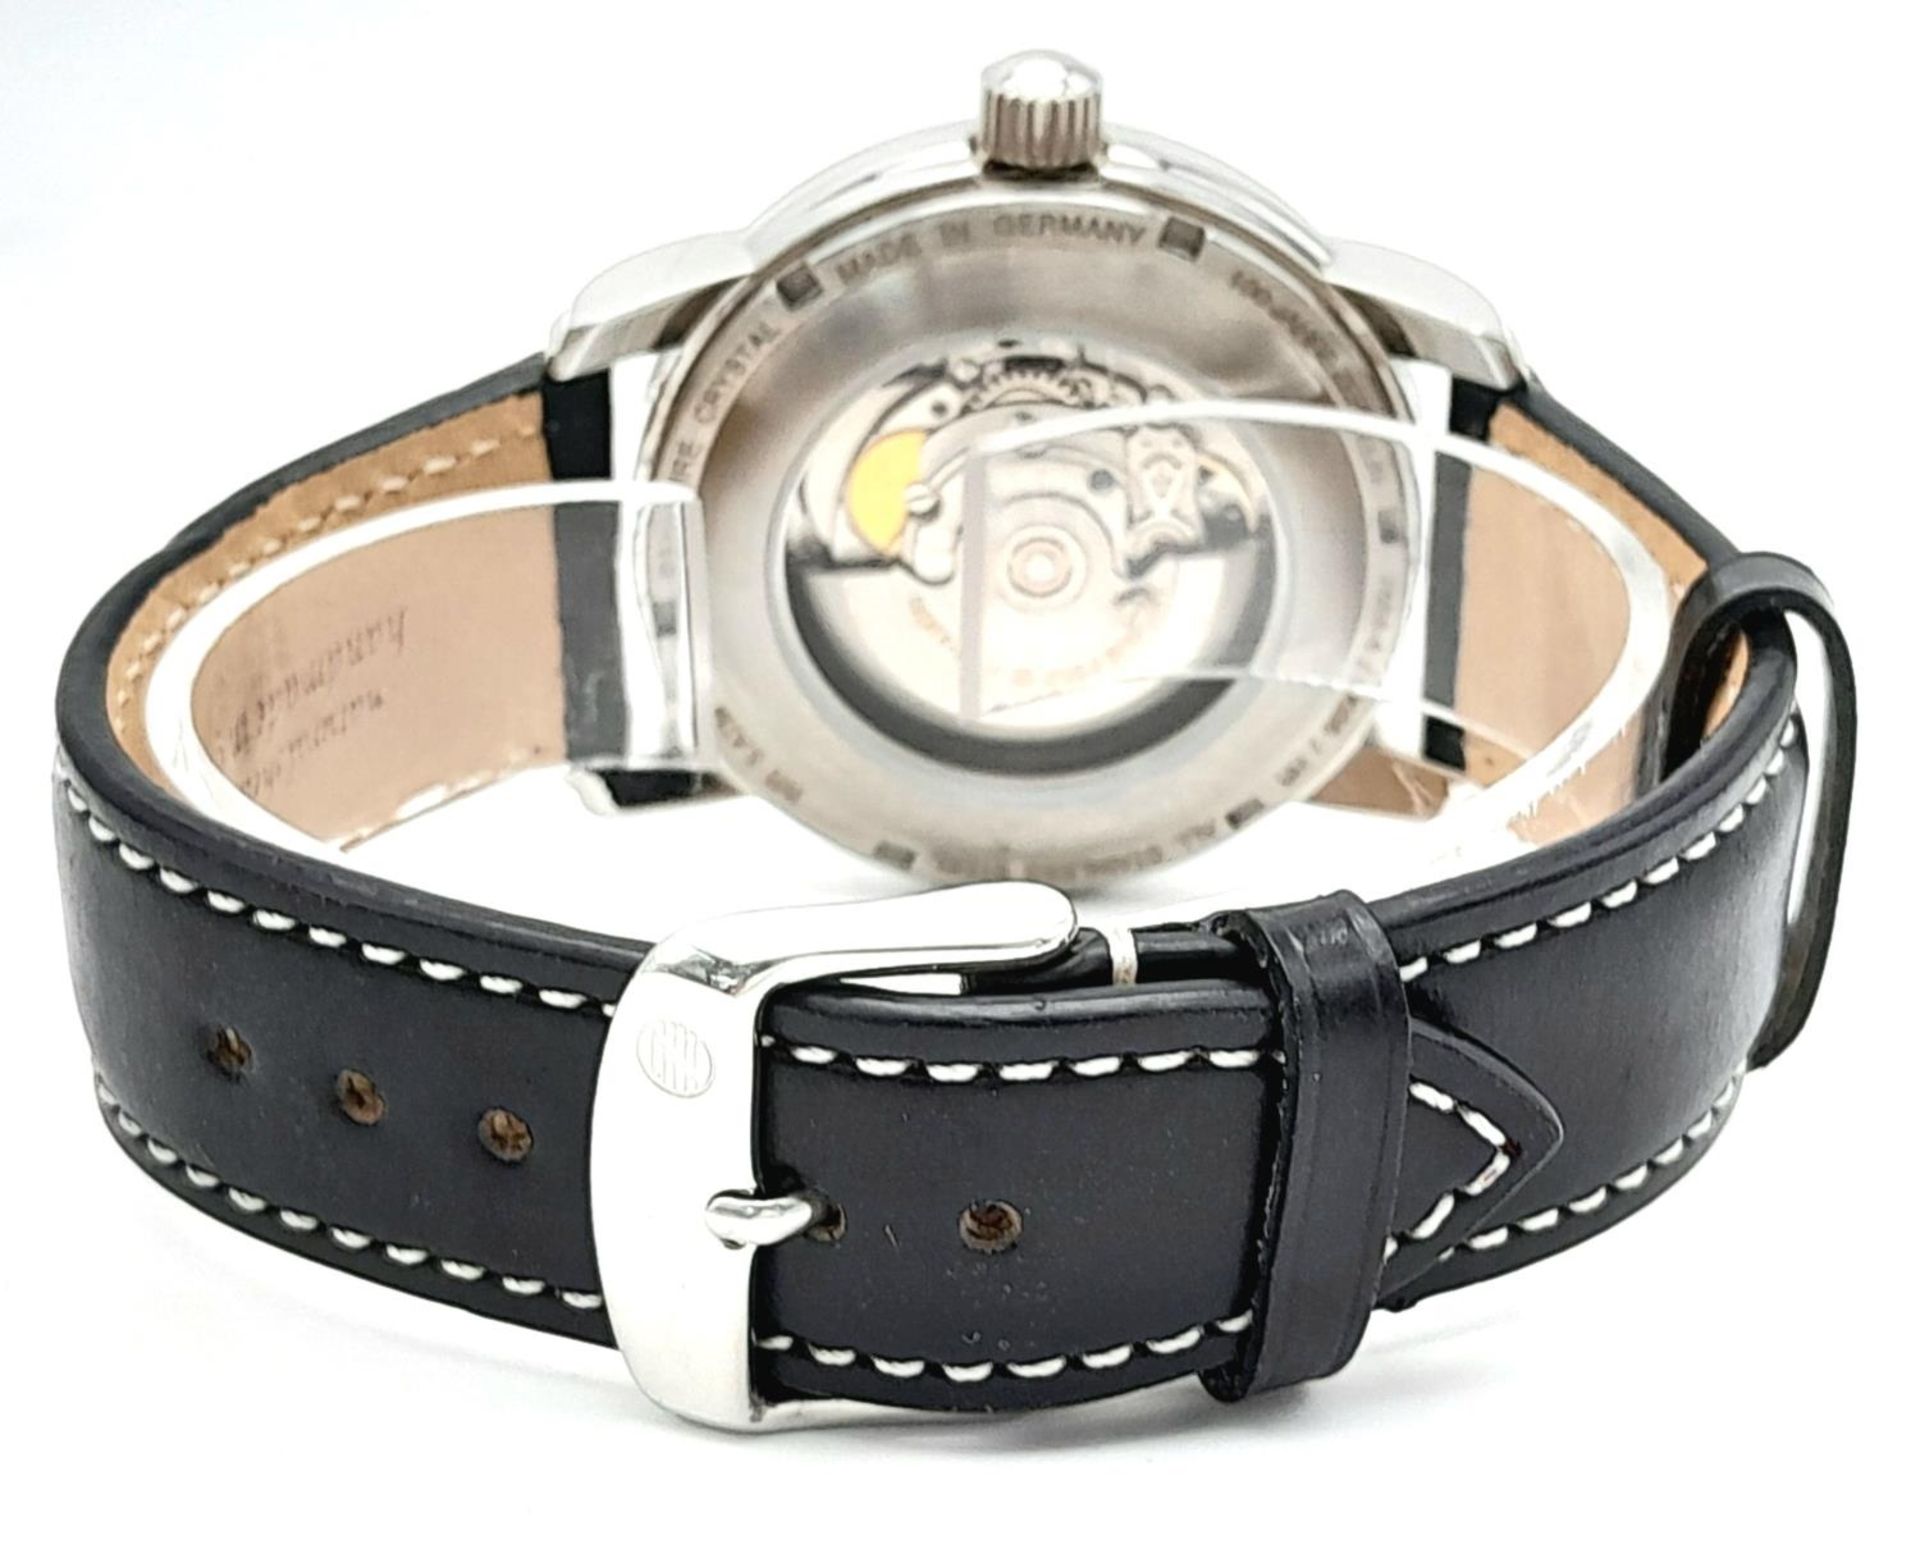 A Zeppelin Automatic Gents Watch. Black leather strap. Stainless steel case - 42mm. White dial - Bild 4 aus 6